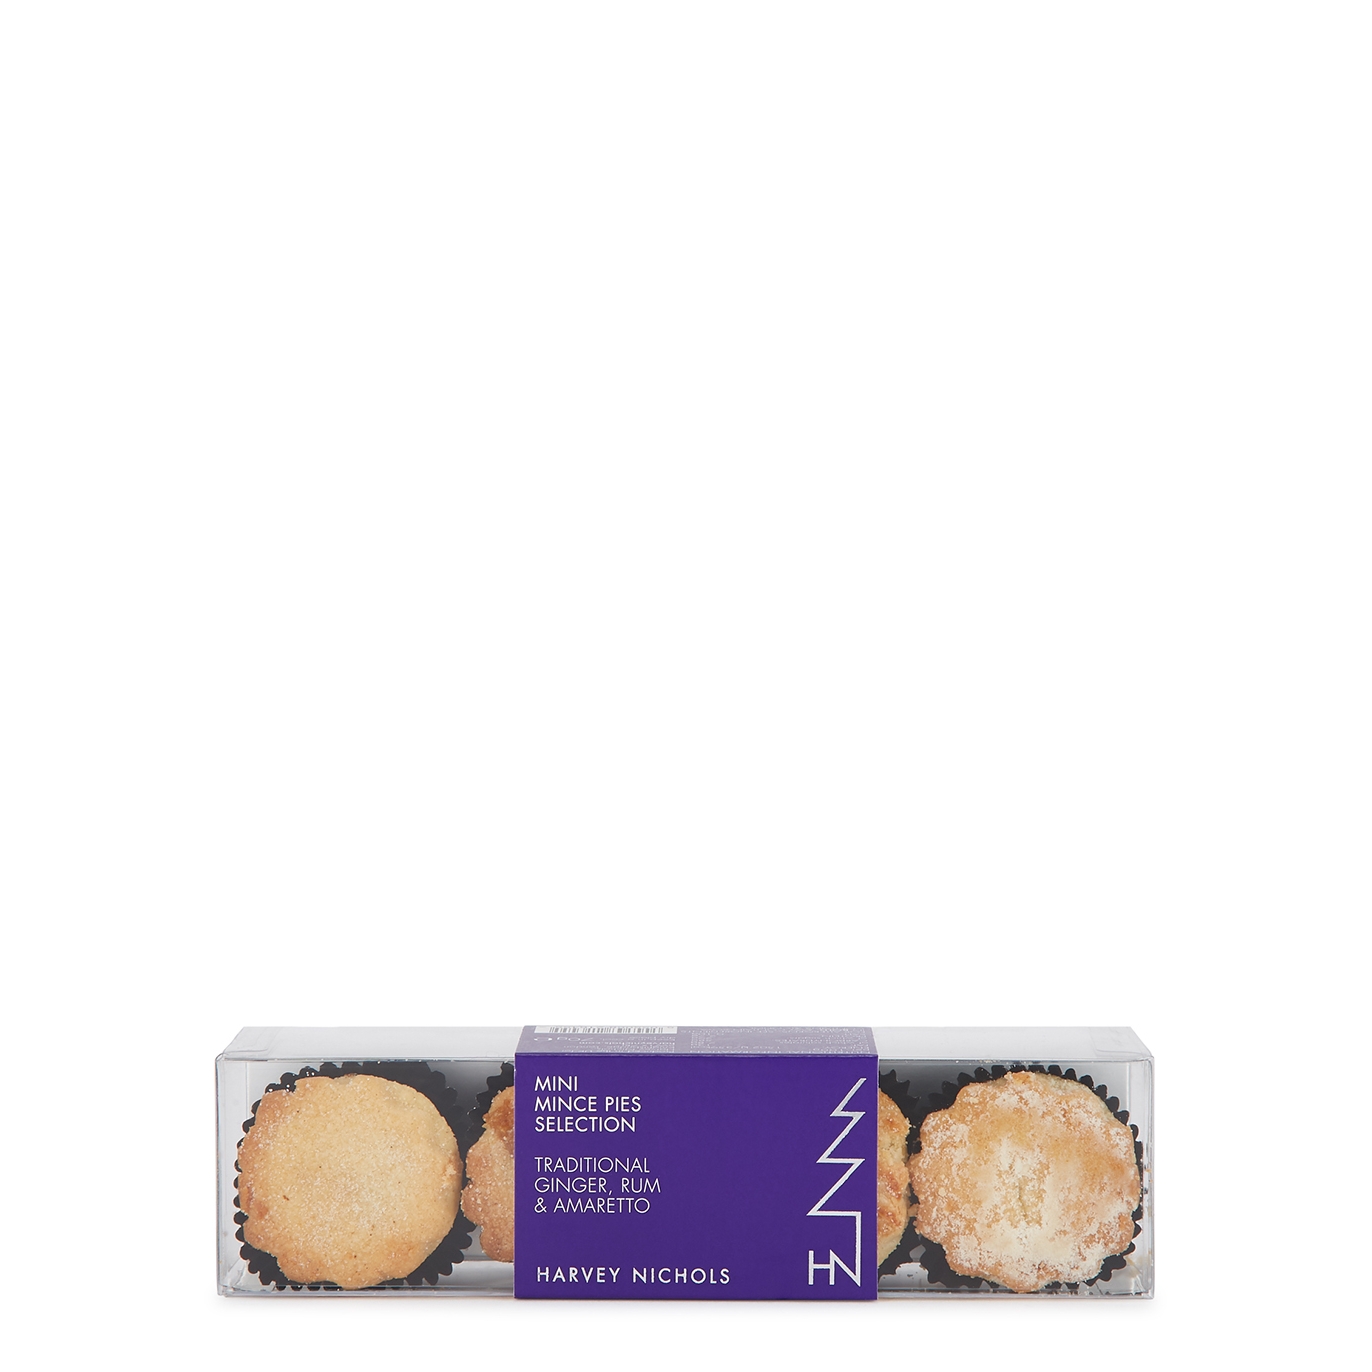 Harvey Nichols 4 Mini Traditional, Ginger, Rum & Amaretto Mince Pies Selection 70g